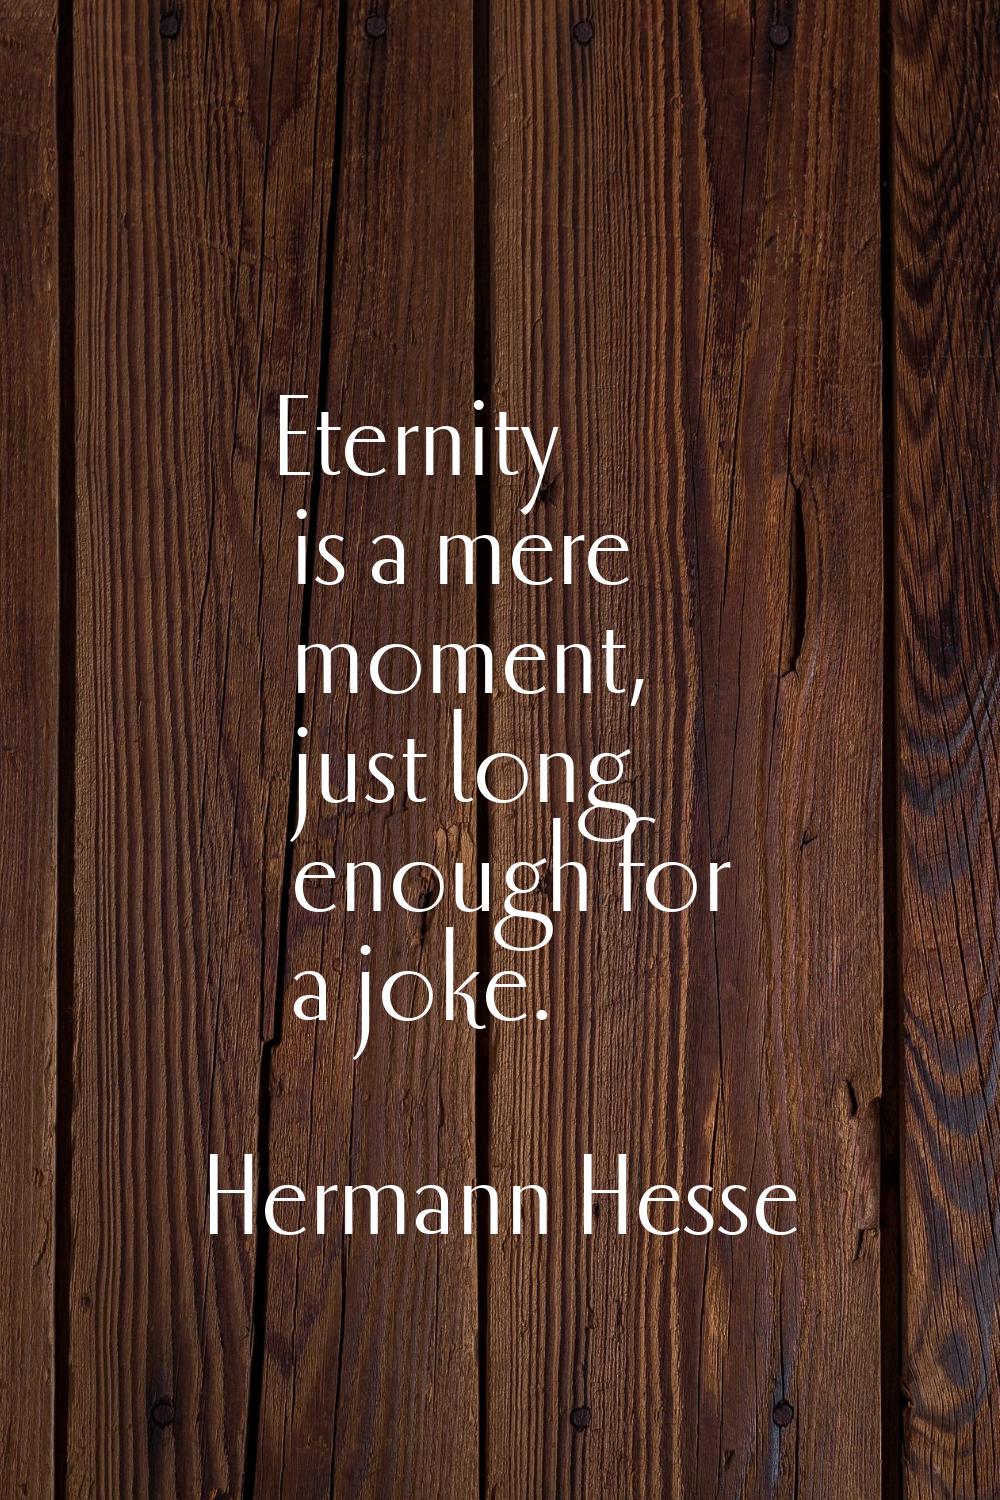 Eternity is a mere moment, just long enough for a joke.